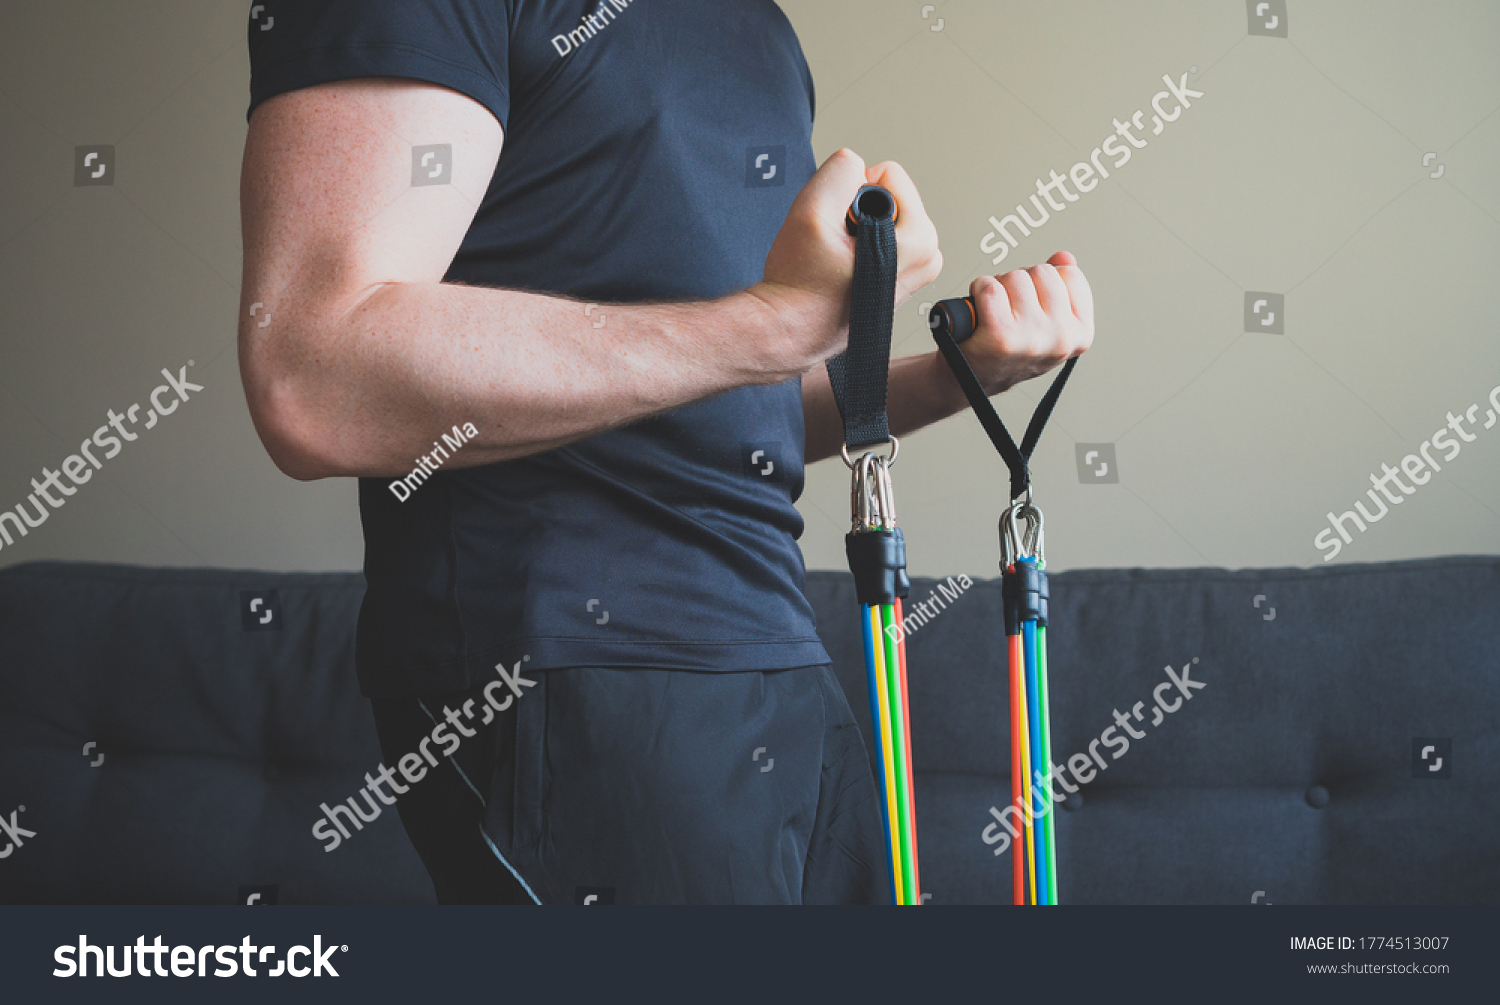 Man doing exercises with resistance bands at home. #1774513007